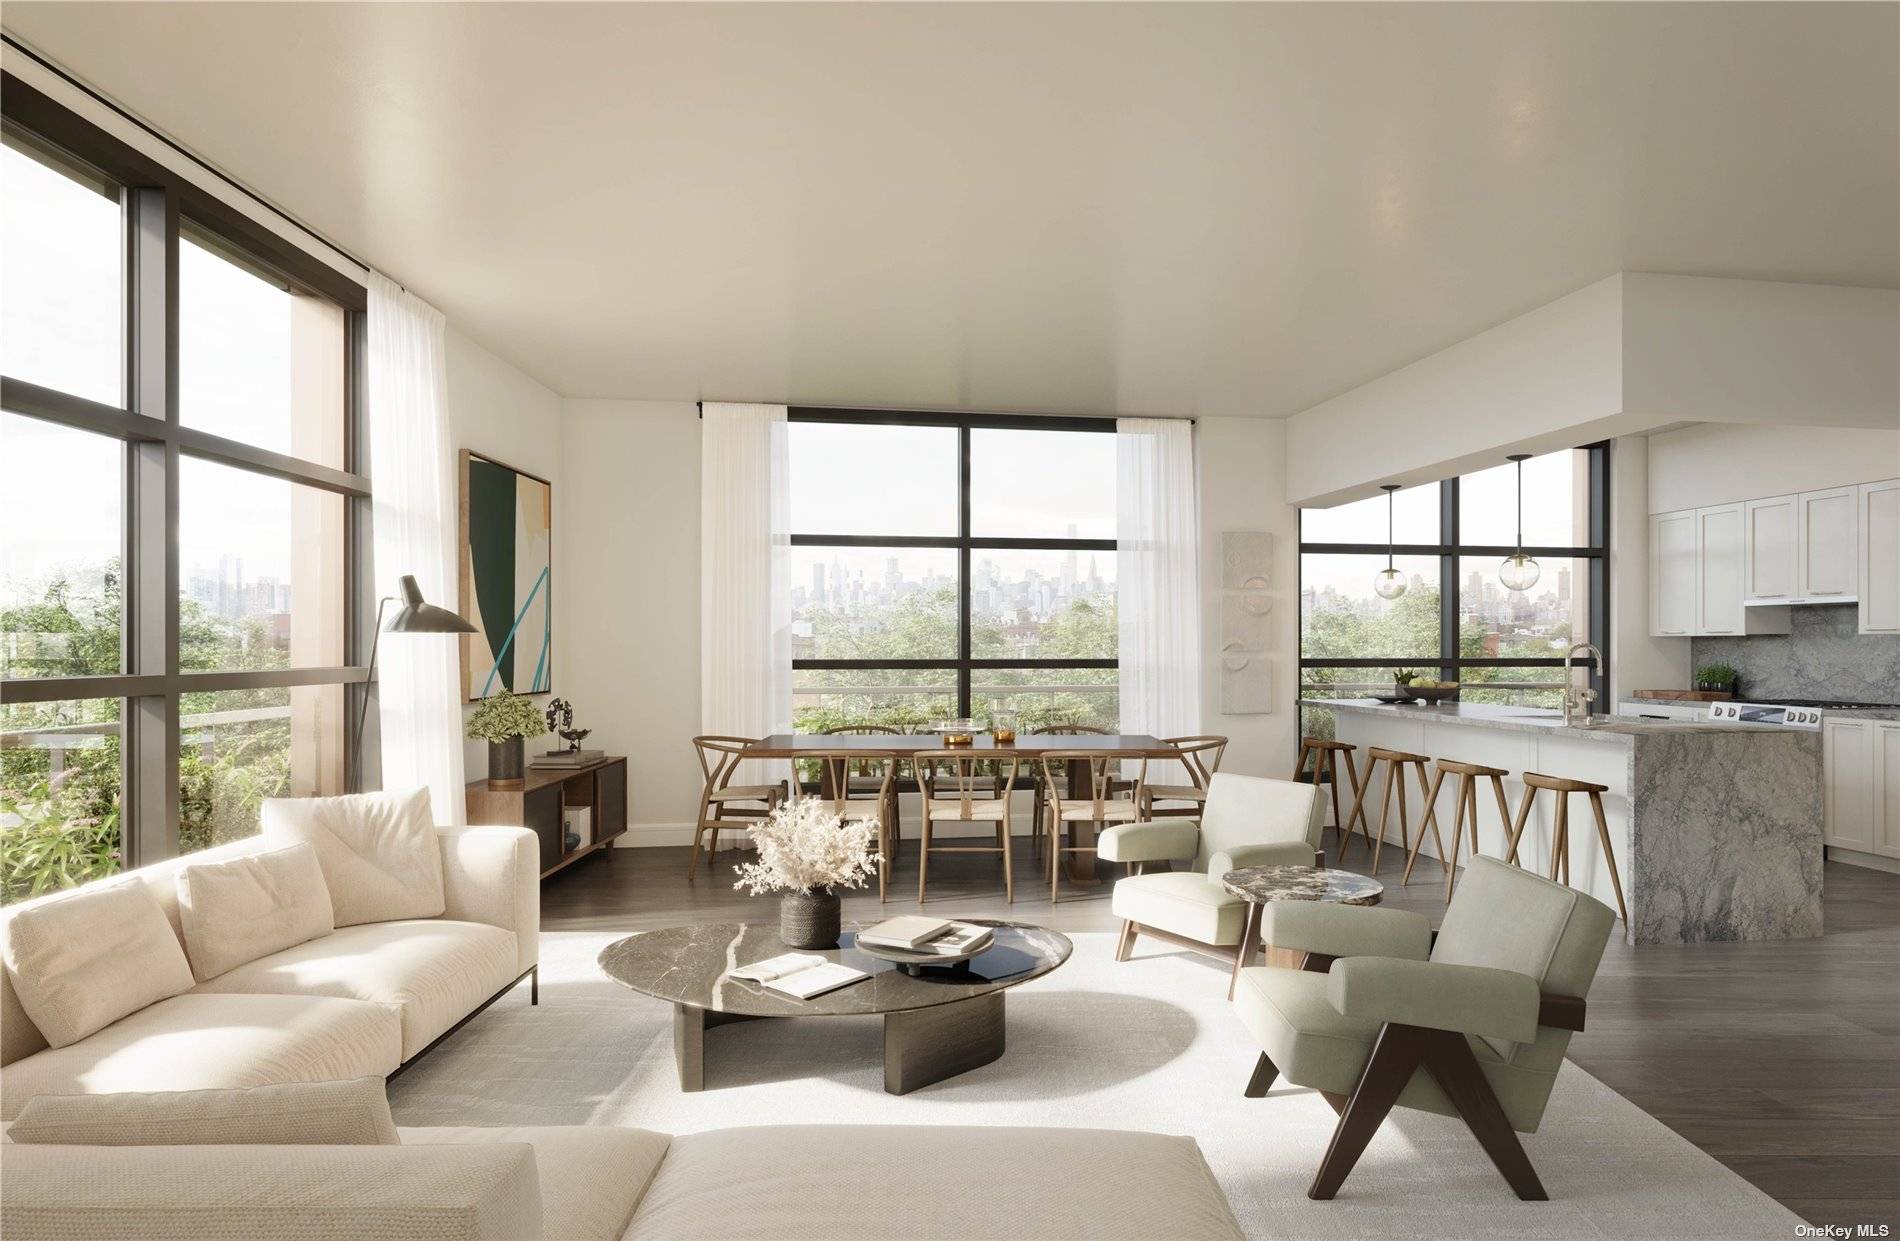 Introducing Residence 10C at BLVD, a stunning three bedroom, two bathroom condominium with balcony that offers an unparalleled living experience in the heart of Forest Hills.